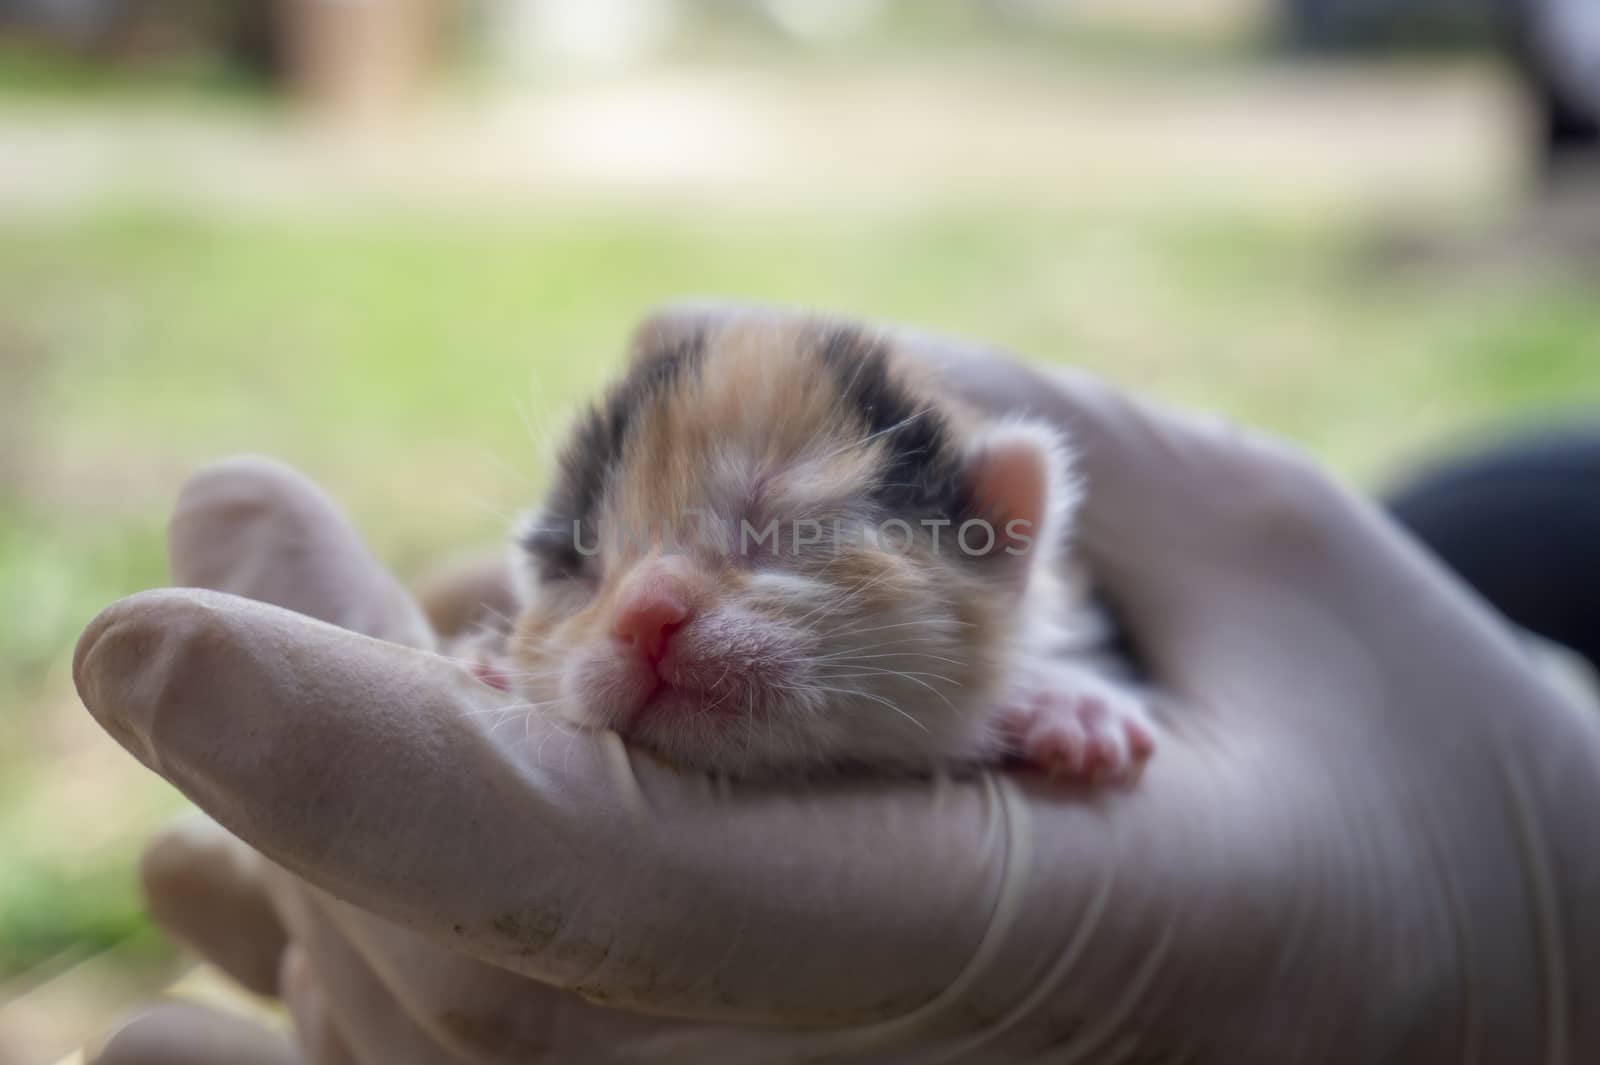 Person holding a tiny ginger kitten with closed eyes in gloved hands outdoors in close up